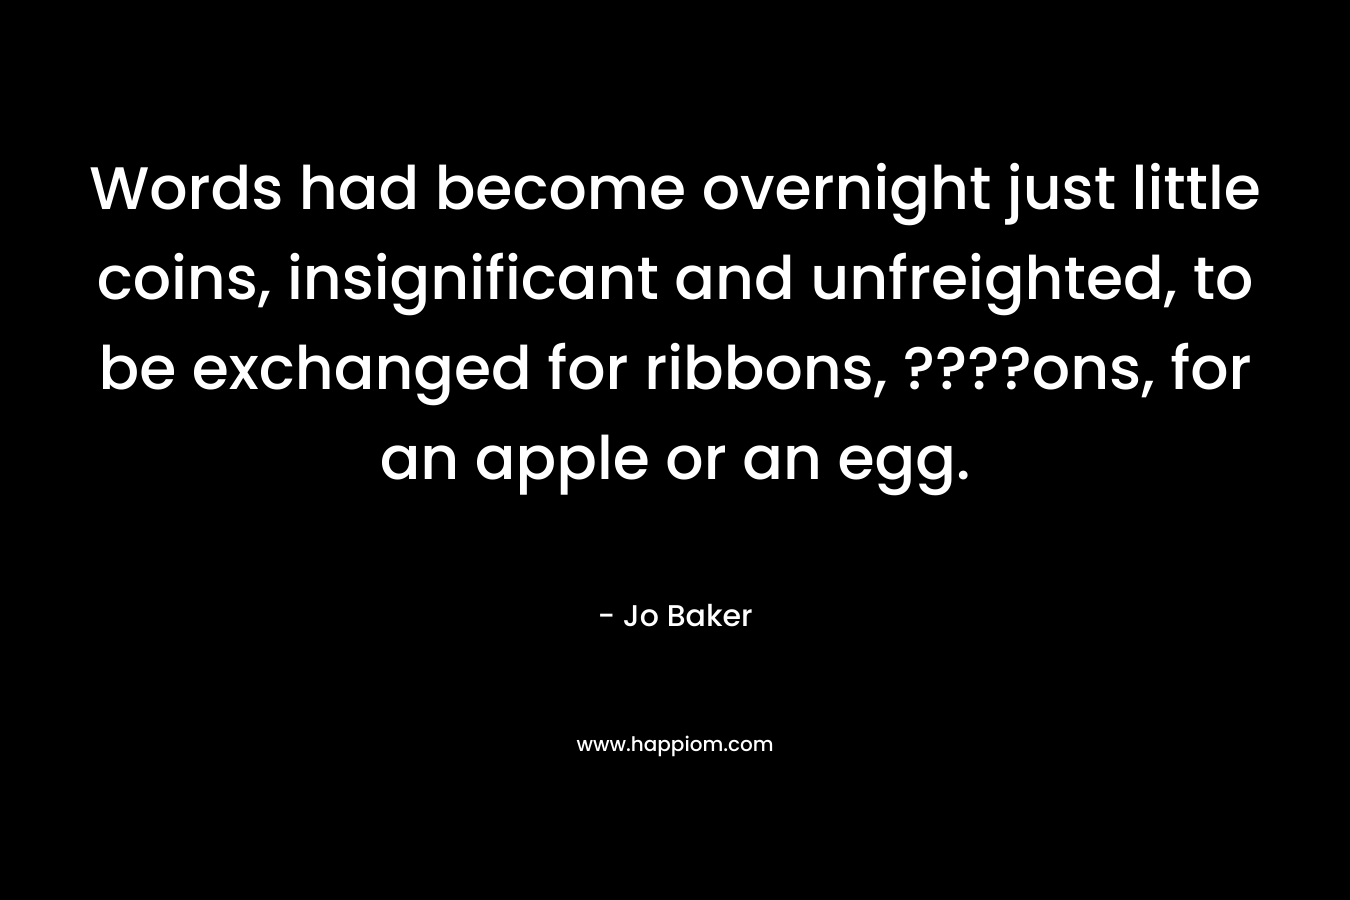 Words had become overnight just little coins, insignificant and unfreighted, to be exchanged for ribbons, ????ons, for an apple or an egg. – Jo Baker